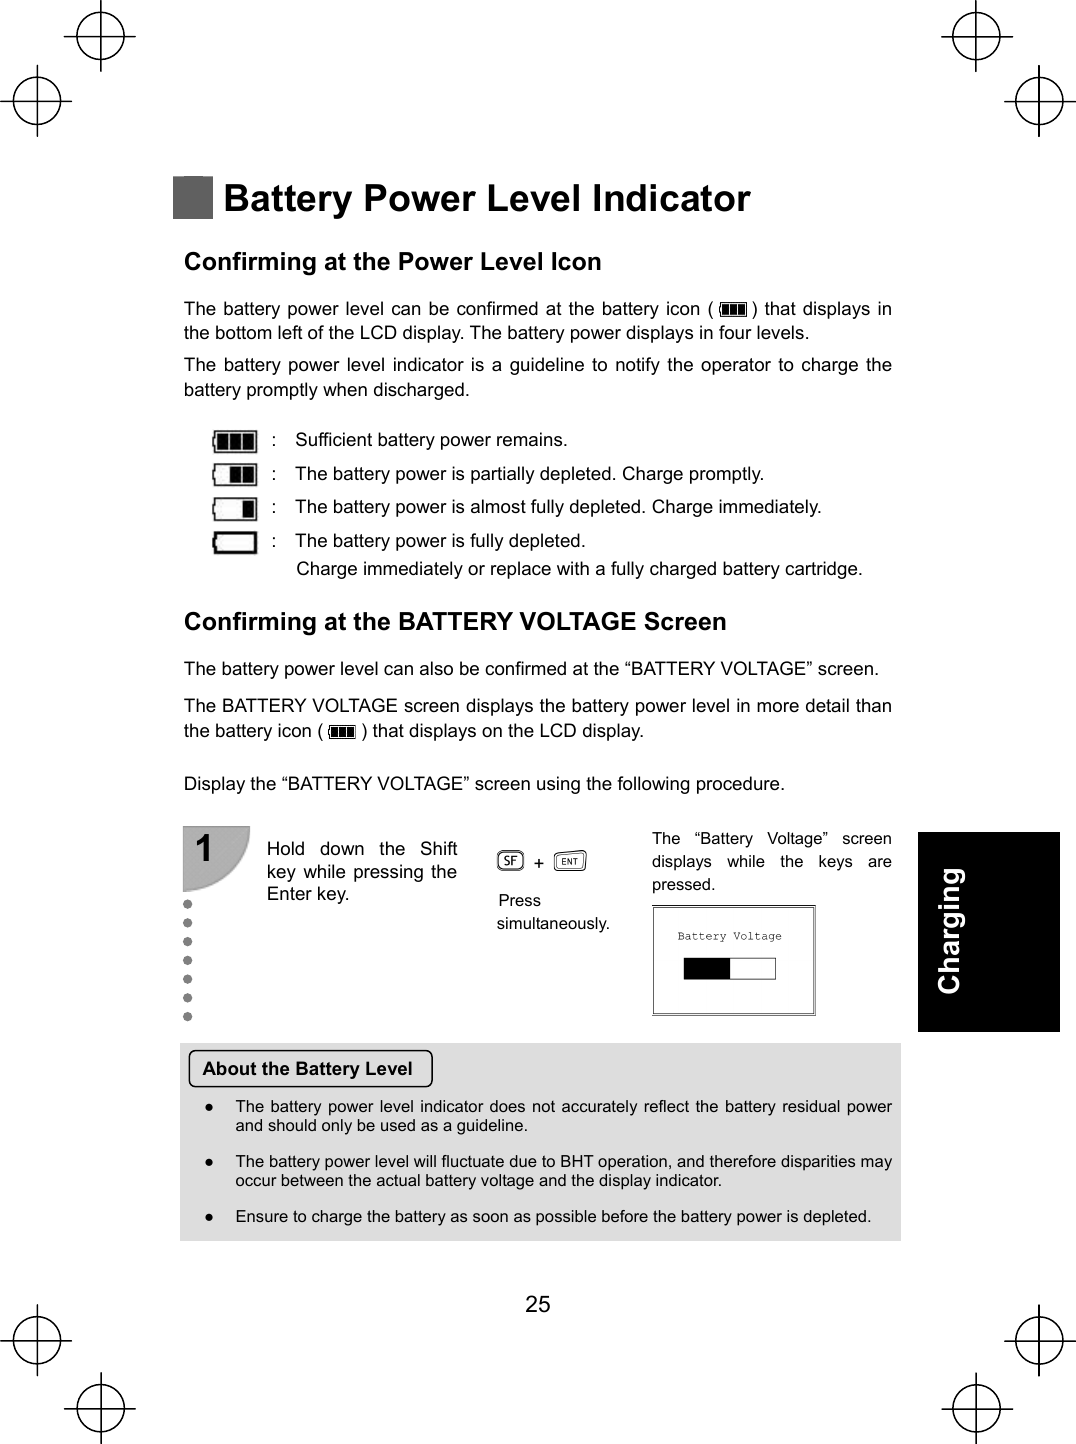  25 Charging   Battery Power Level Indicator Confirming at the Power Level Icon The battery power level can be confirmed at the battery icon (      ) that displays in the bottom left of the LCD display. The battery power displays in four levels. The battery power level indicator is a guideline to notify the operator to charge the battery promptly when discharged.  :    Sufficient battery power remains. :    The battery power is partially depleted. Charge promptly. :    The battery power is almost fully depleted. Charge immediately. :    The battery power is fully depleted. Charge immediately or replace with a fully charged battery cartridge. Confirming at the BATTERY VOLTAGE Screen The battery power level can also be confirmed at the “BATTERY VOLTAGE” screen. The BATTERY VOLTAGE screen displays the battery power level in more detail than the battery icon (        ) that displays on the LCD display.  Display the “BATTERY VOLTAGE” screen using the following procedure. 1   +   Hold down the Shift key while pressing the Enter key. Press simultaneously. The “Battery Voltage” screen displays while the keys are pressed.  About the Battery Level Ɣ  The battery power level indicator does not accurately reflect the battery residual power and should only be used as a guideline. Ɣ  The battery power level will fluctuate due to BHT operation, and therefore disparities may occur between the actual battery voltage and the display indicator. Ɣ  Ensure to charge the battery as soon as possible before the battery power is depleted.   